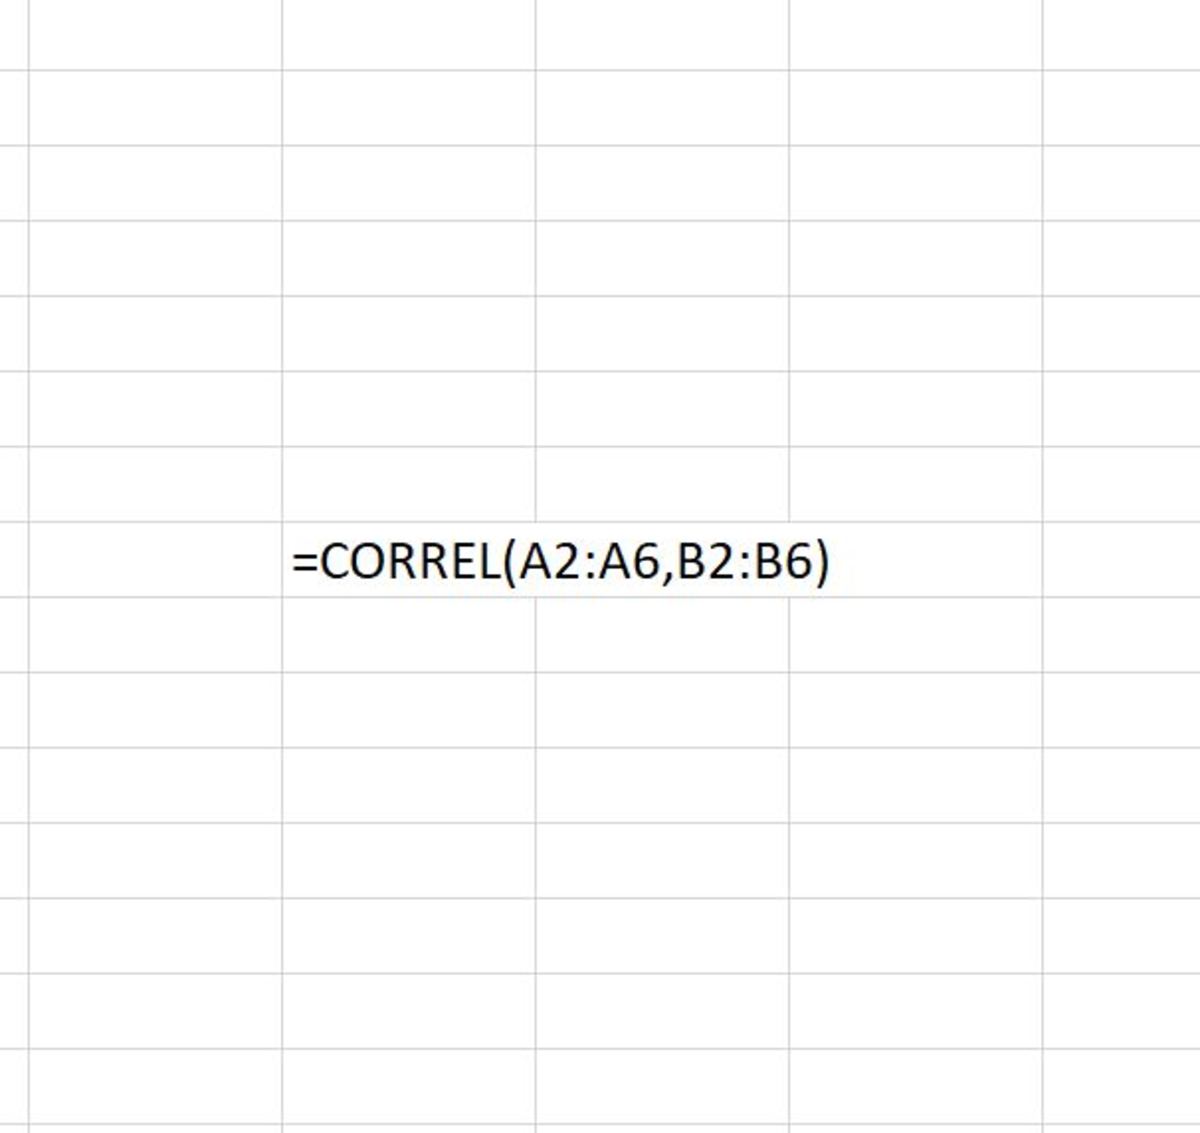 How to Use the CORREL Function in Excel - 1